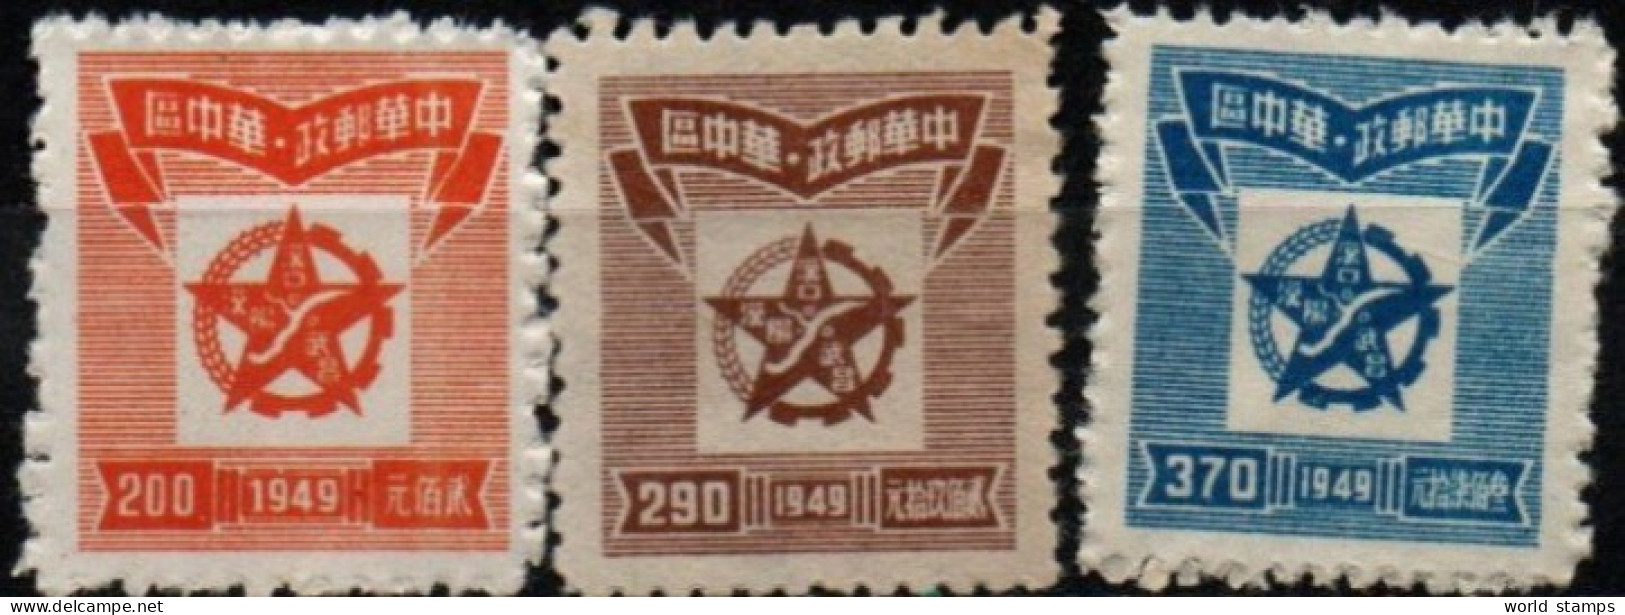 CHINE CENTRALE 1949 SANS GOMME - Central China 1948-49